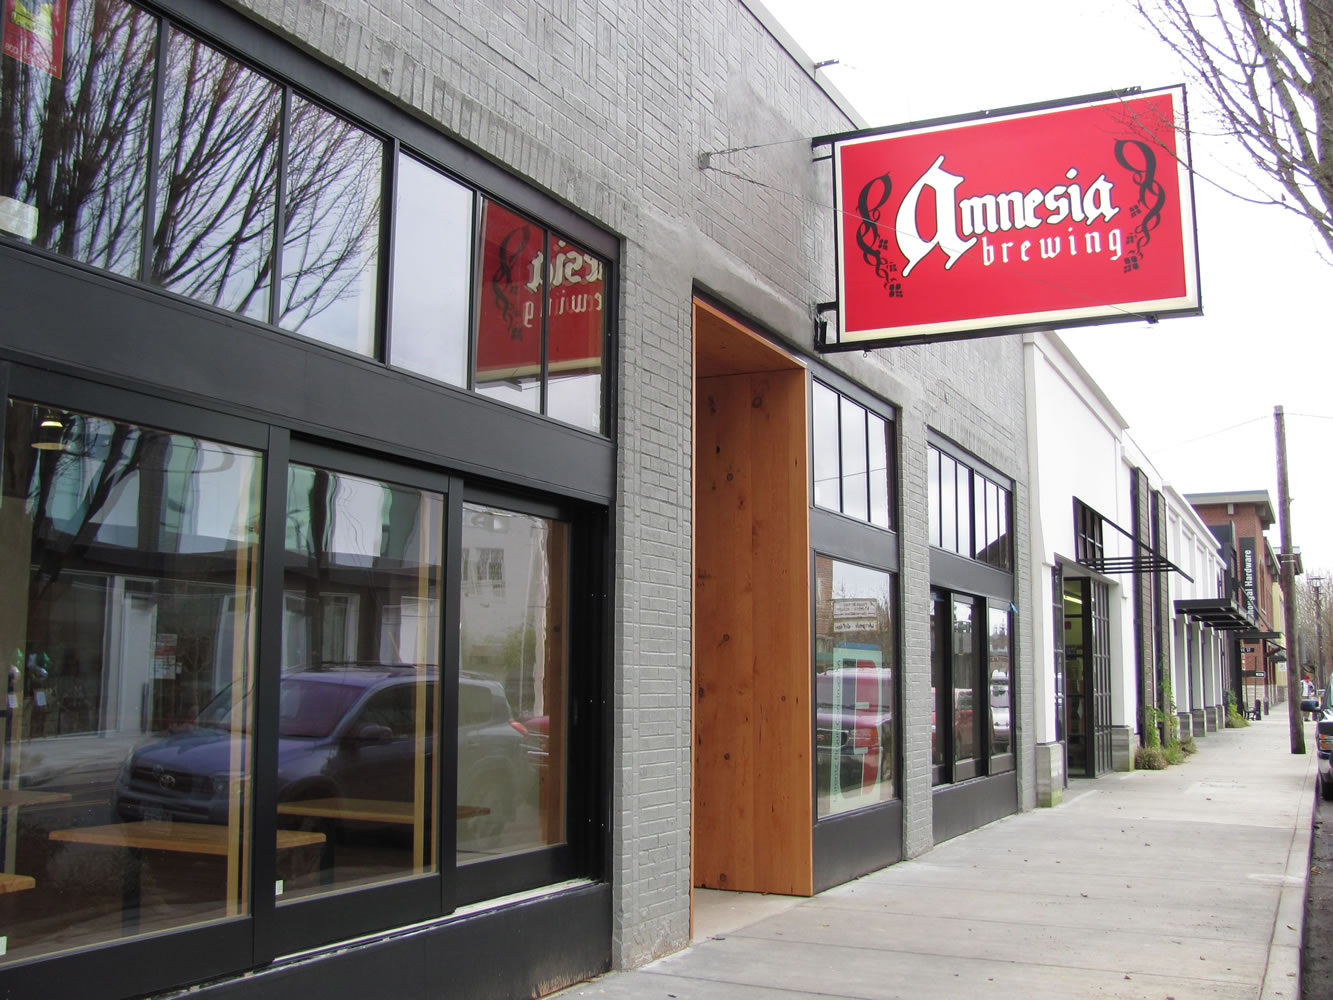 Post-Record file photo
Amnesia Brewing owners will move the brewery's operations from North Portland to downtown Washougal. The company has sold its Portland location to StormBreaker Brewing. A new 15-barrel brewing system began production in March, at 1834 Main St., in Washougal. It was a month after a tasting room opened at the 5,500-square-foot site.